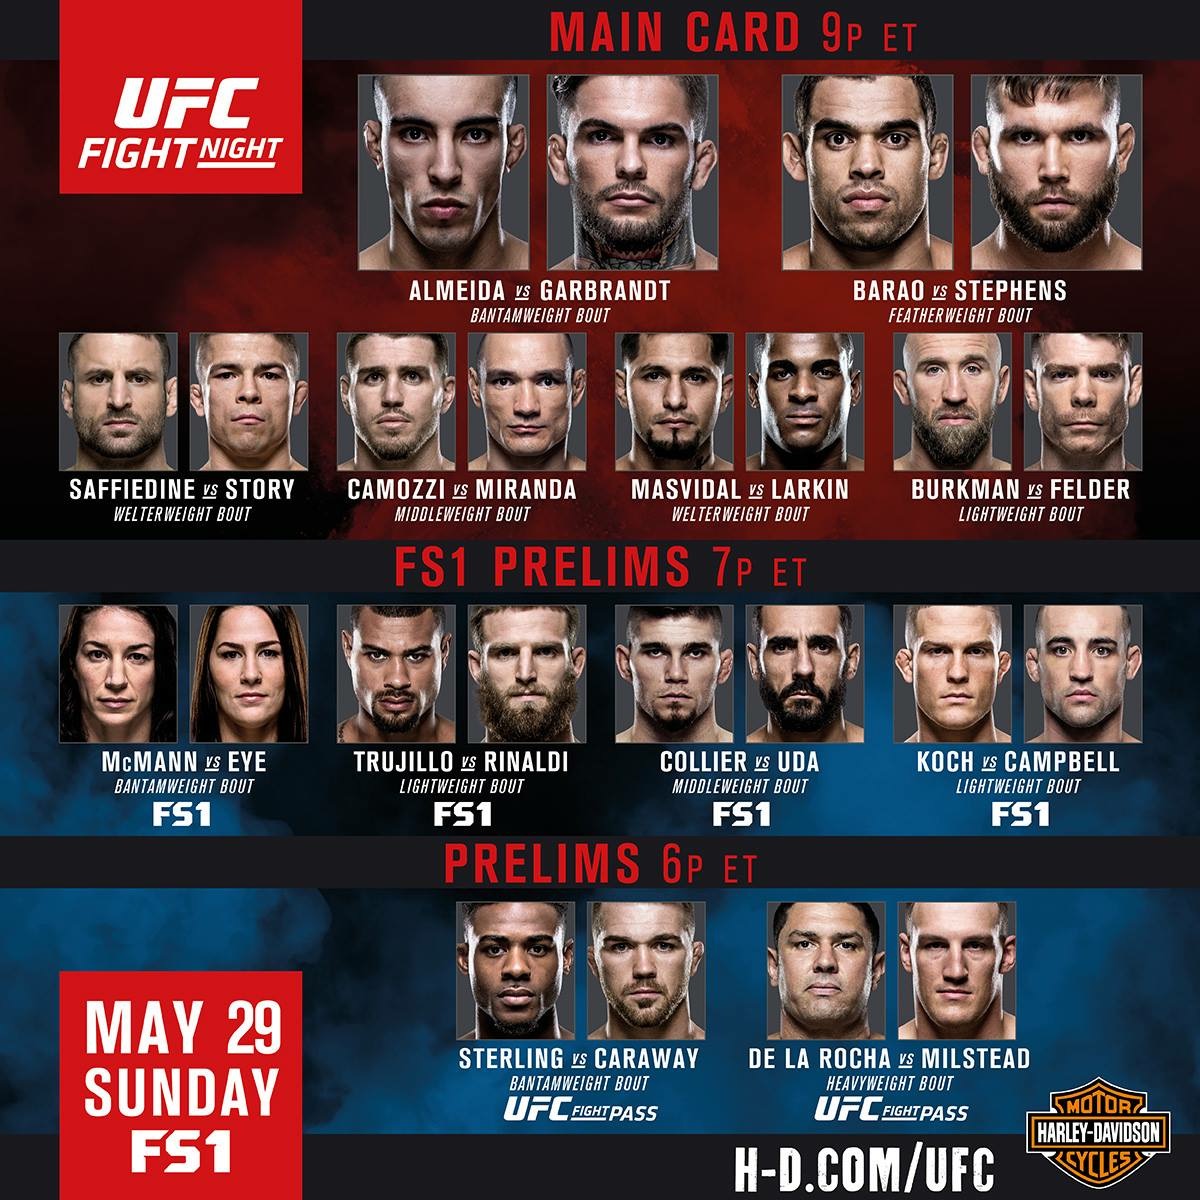 UFC Fight Night 88 Quick Results